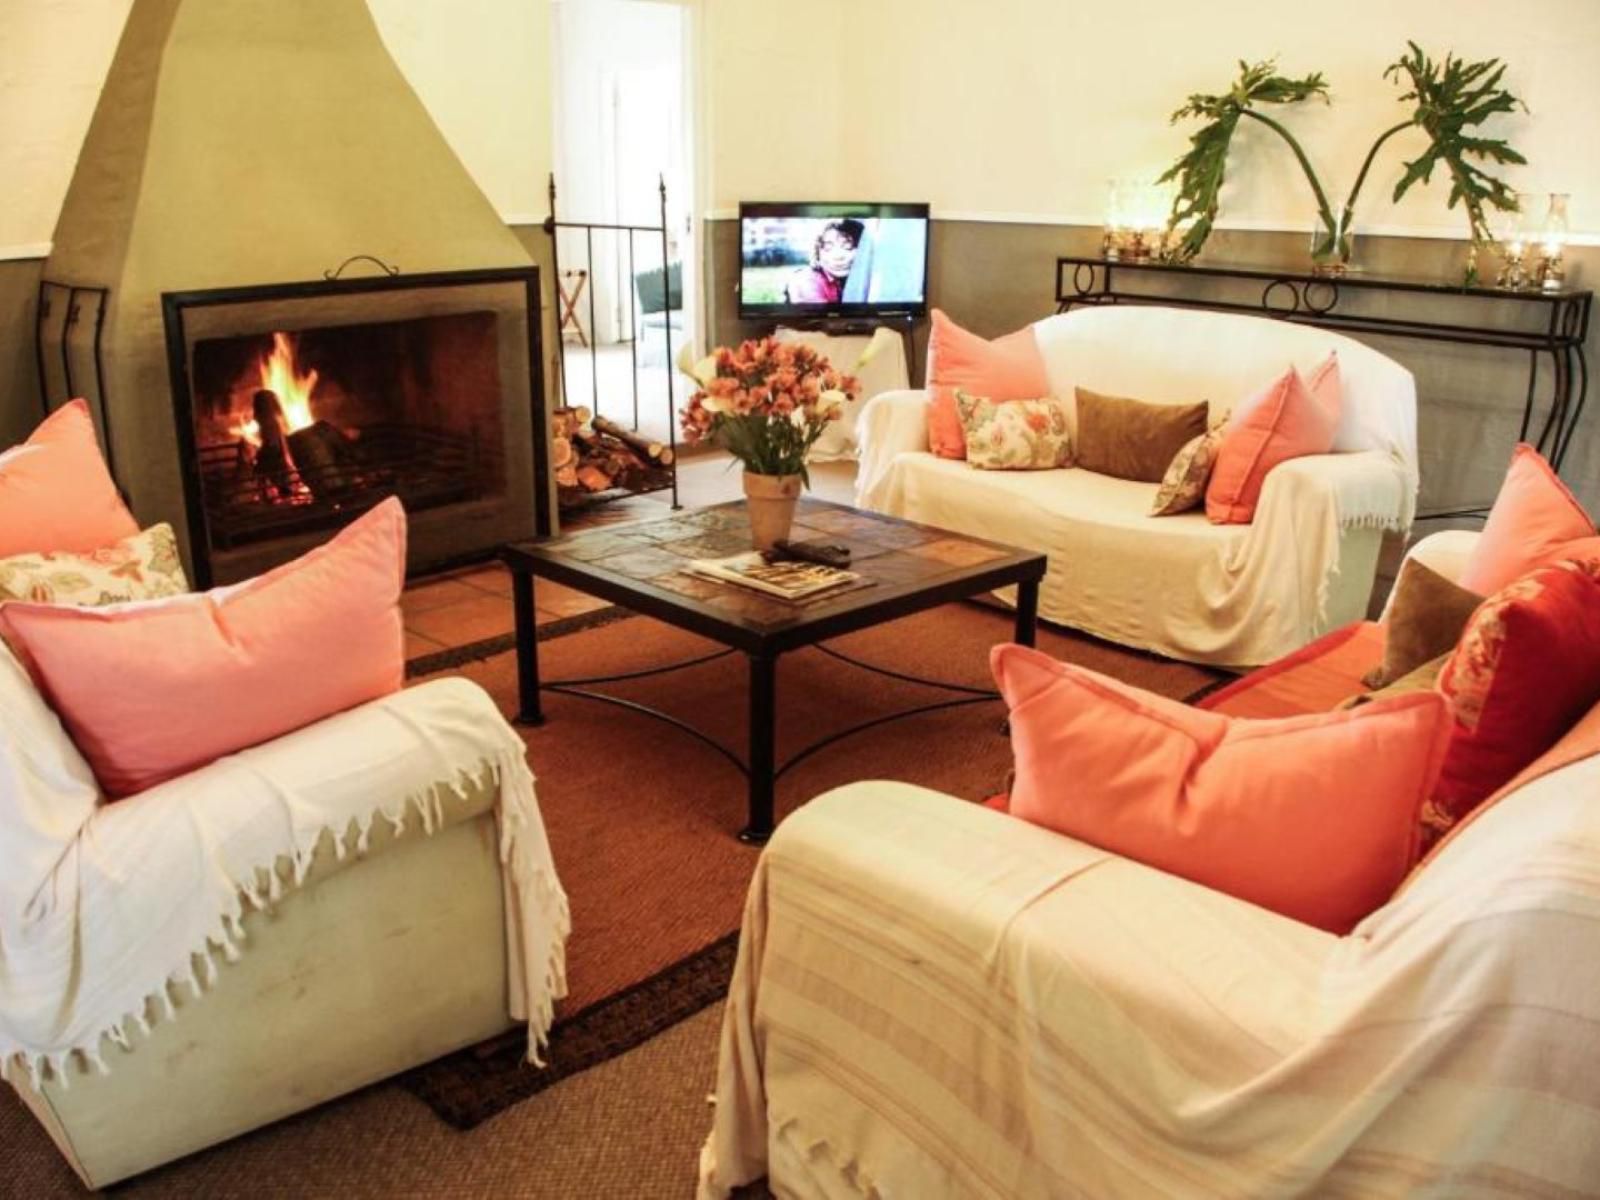 Beverley Country Cottages Dargle Howick Kwazulu Natal South Africa Colorful, Fire, Nature, Living Room